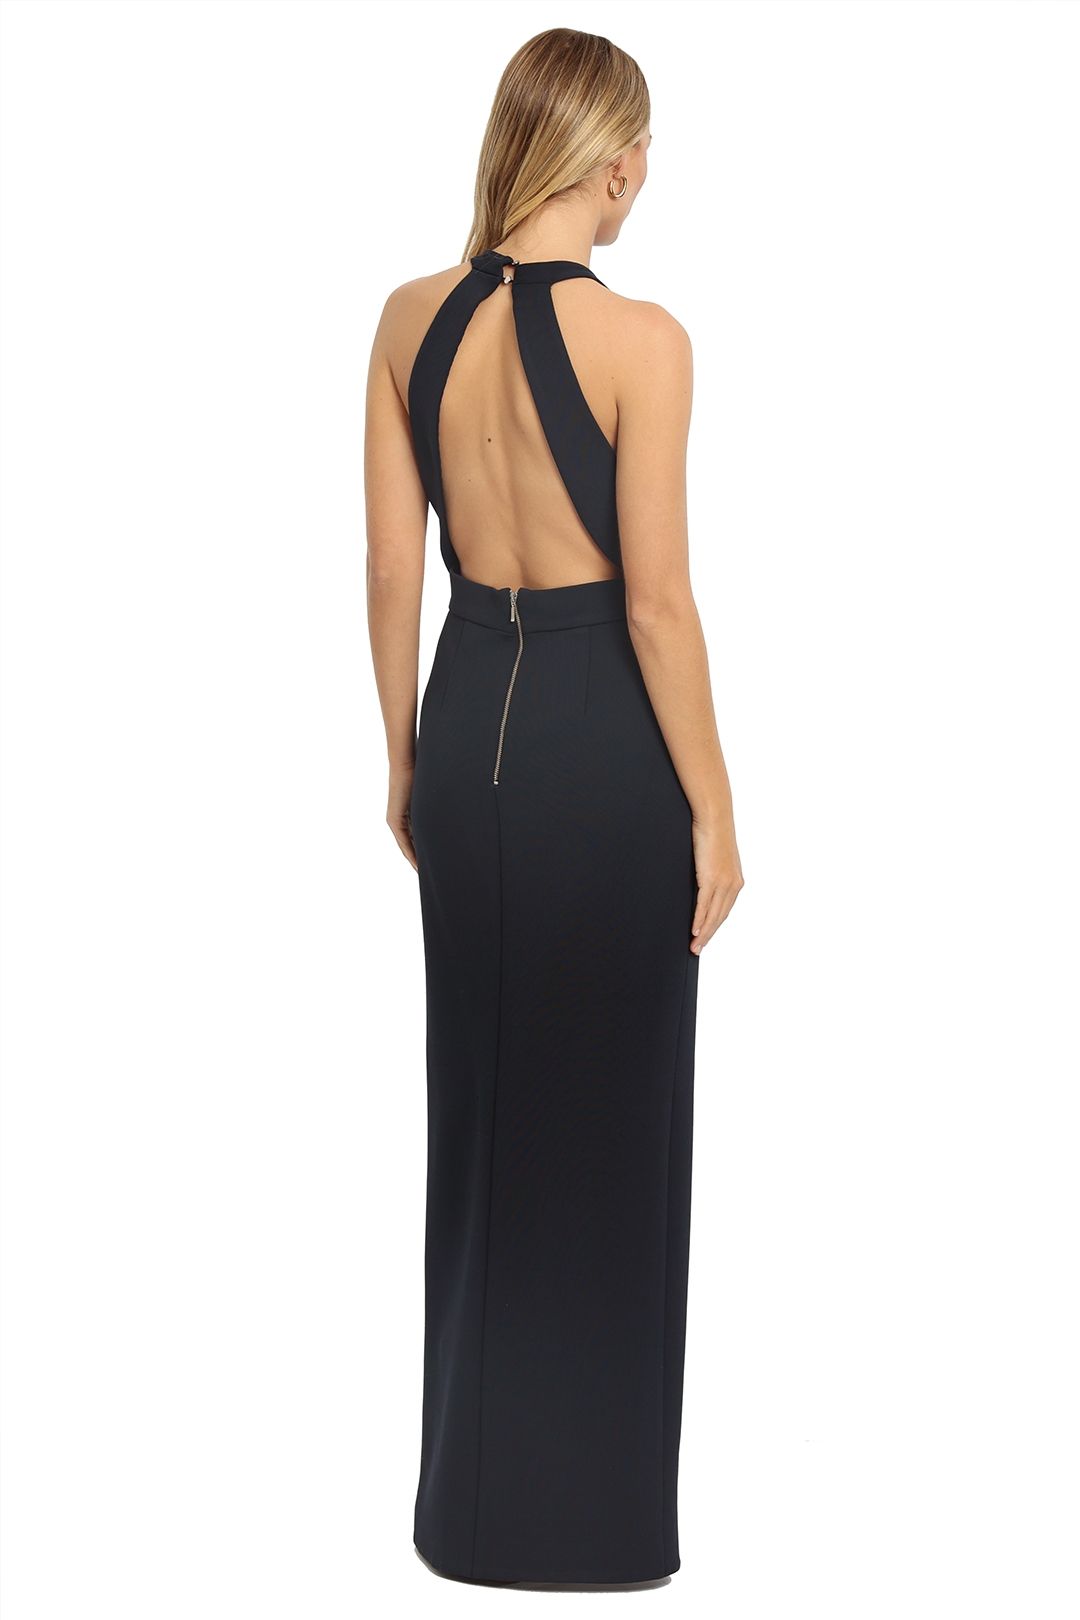 Nicholas Bandage Insert Gown backless